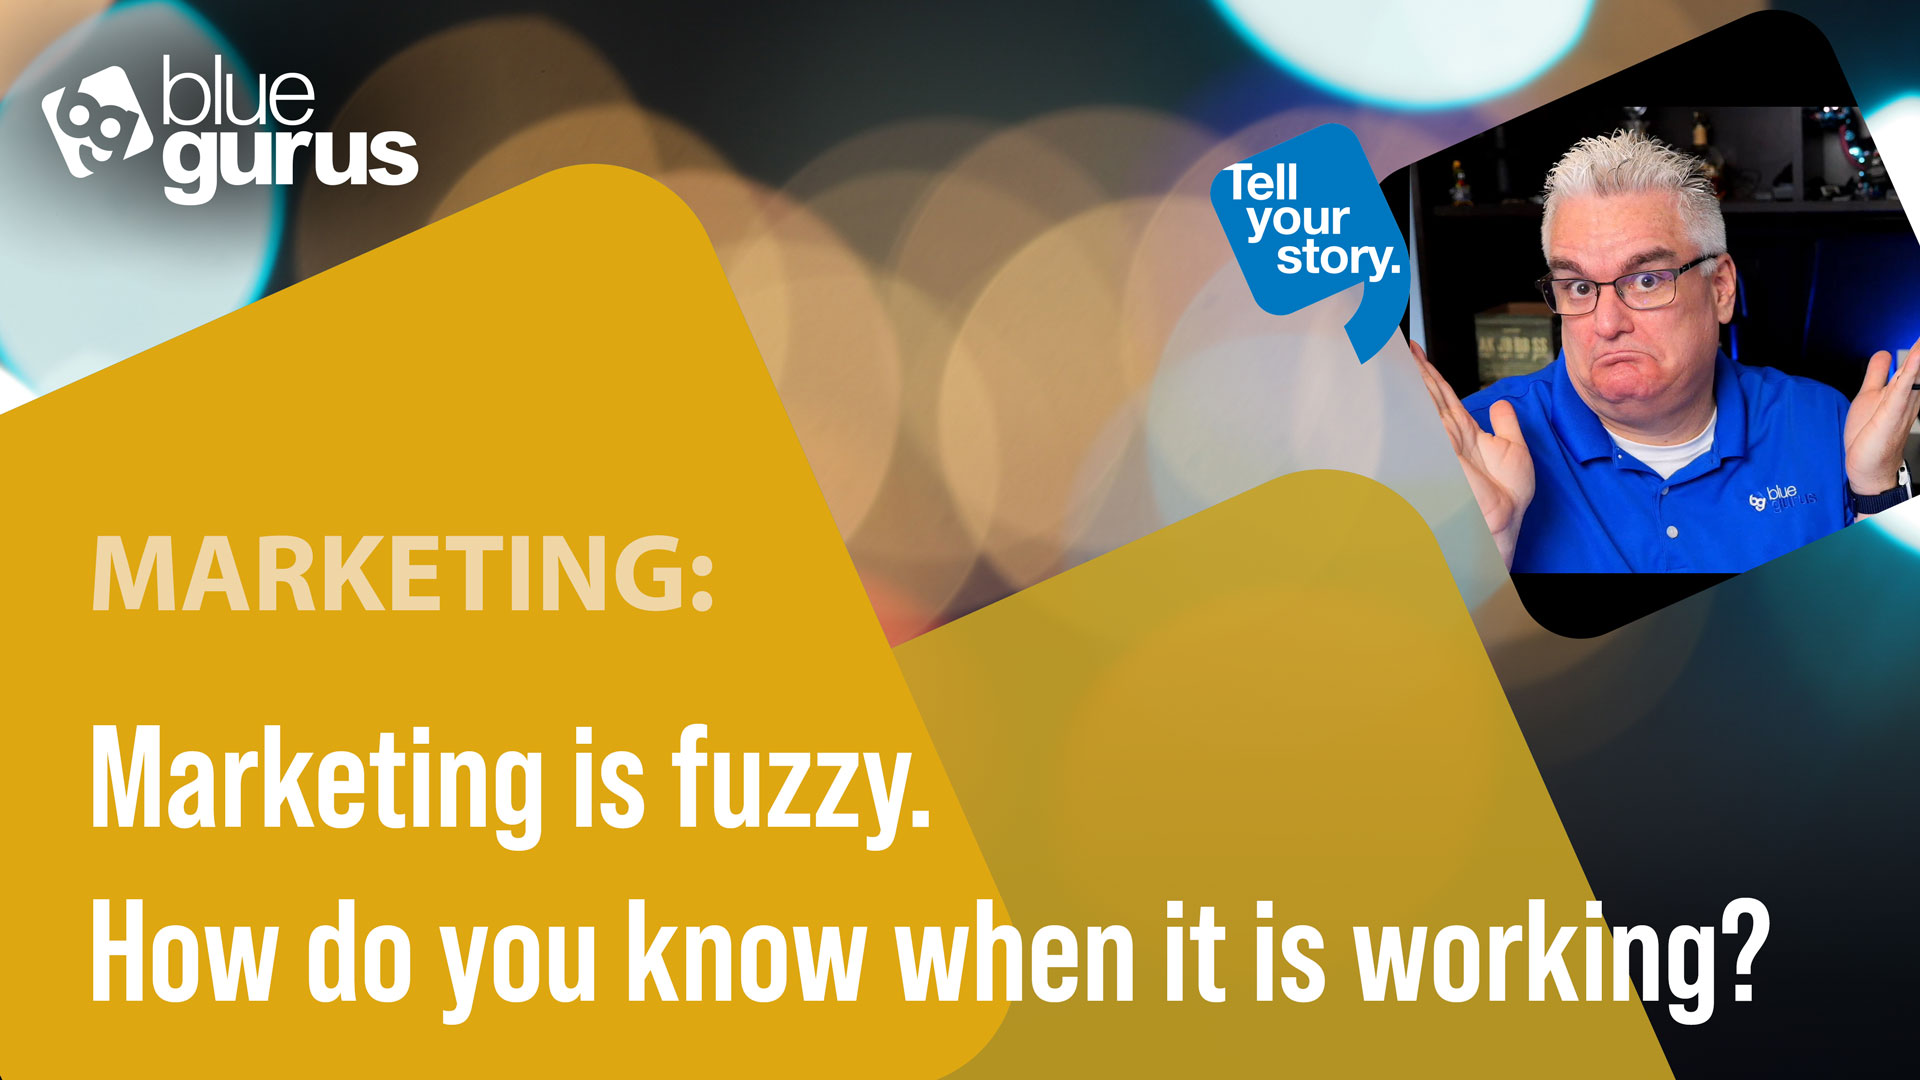 Marketing is fuzzy. How do you know when it is working?